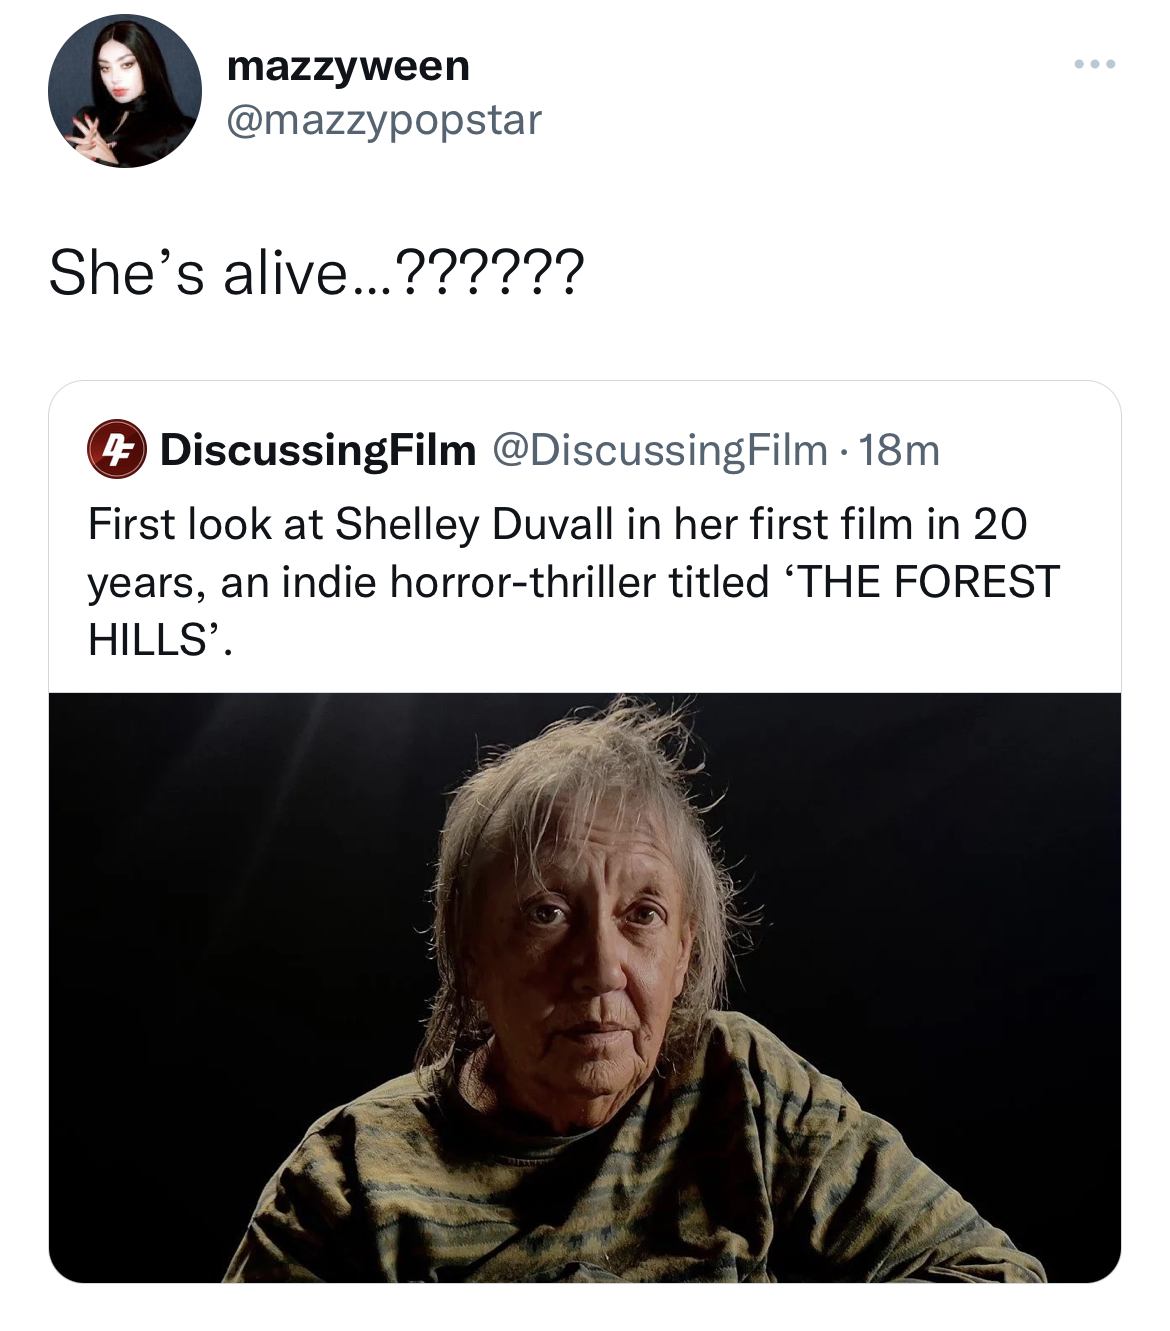 celeb roasts of the week - photo caption - mazzyween She's alive...?????? DiscussingFilm .18m First look at Shelley Duvall in her first film in 20 years, an indie horrorthriller titled 'The Forest Hills'.